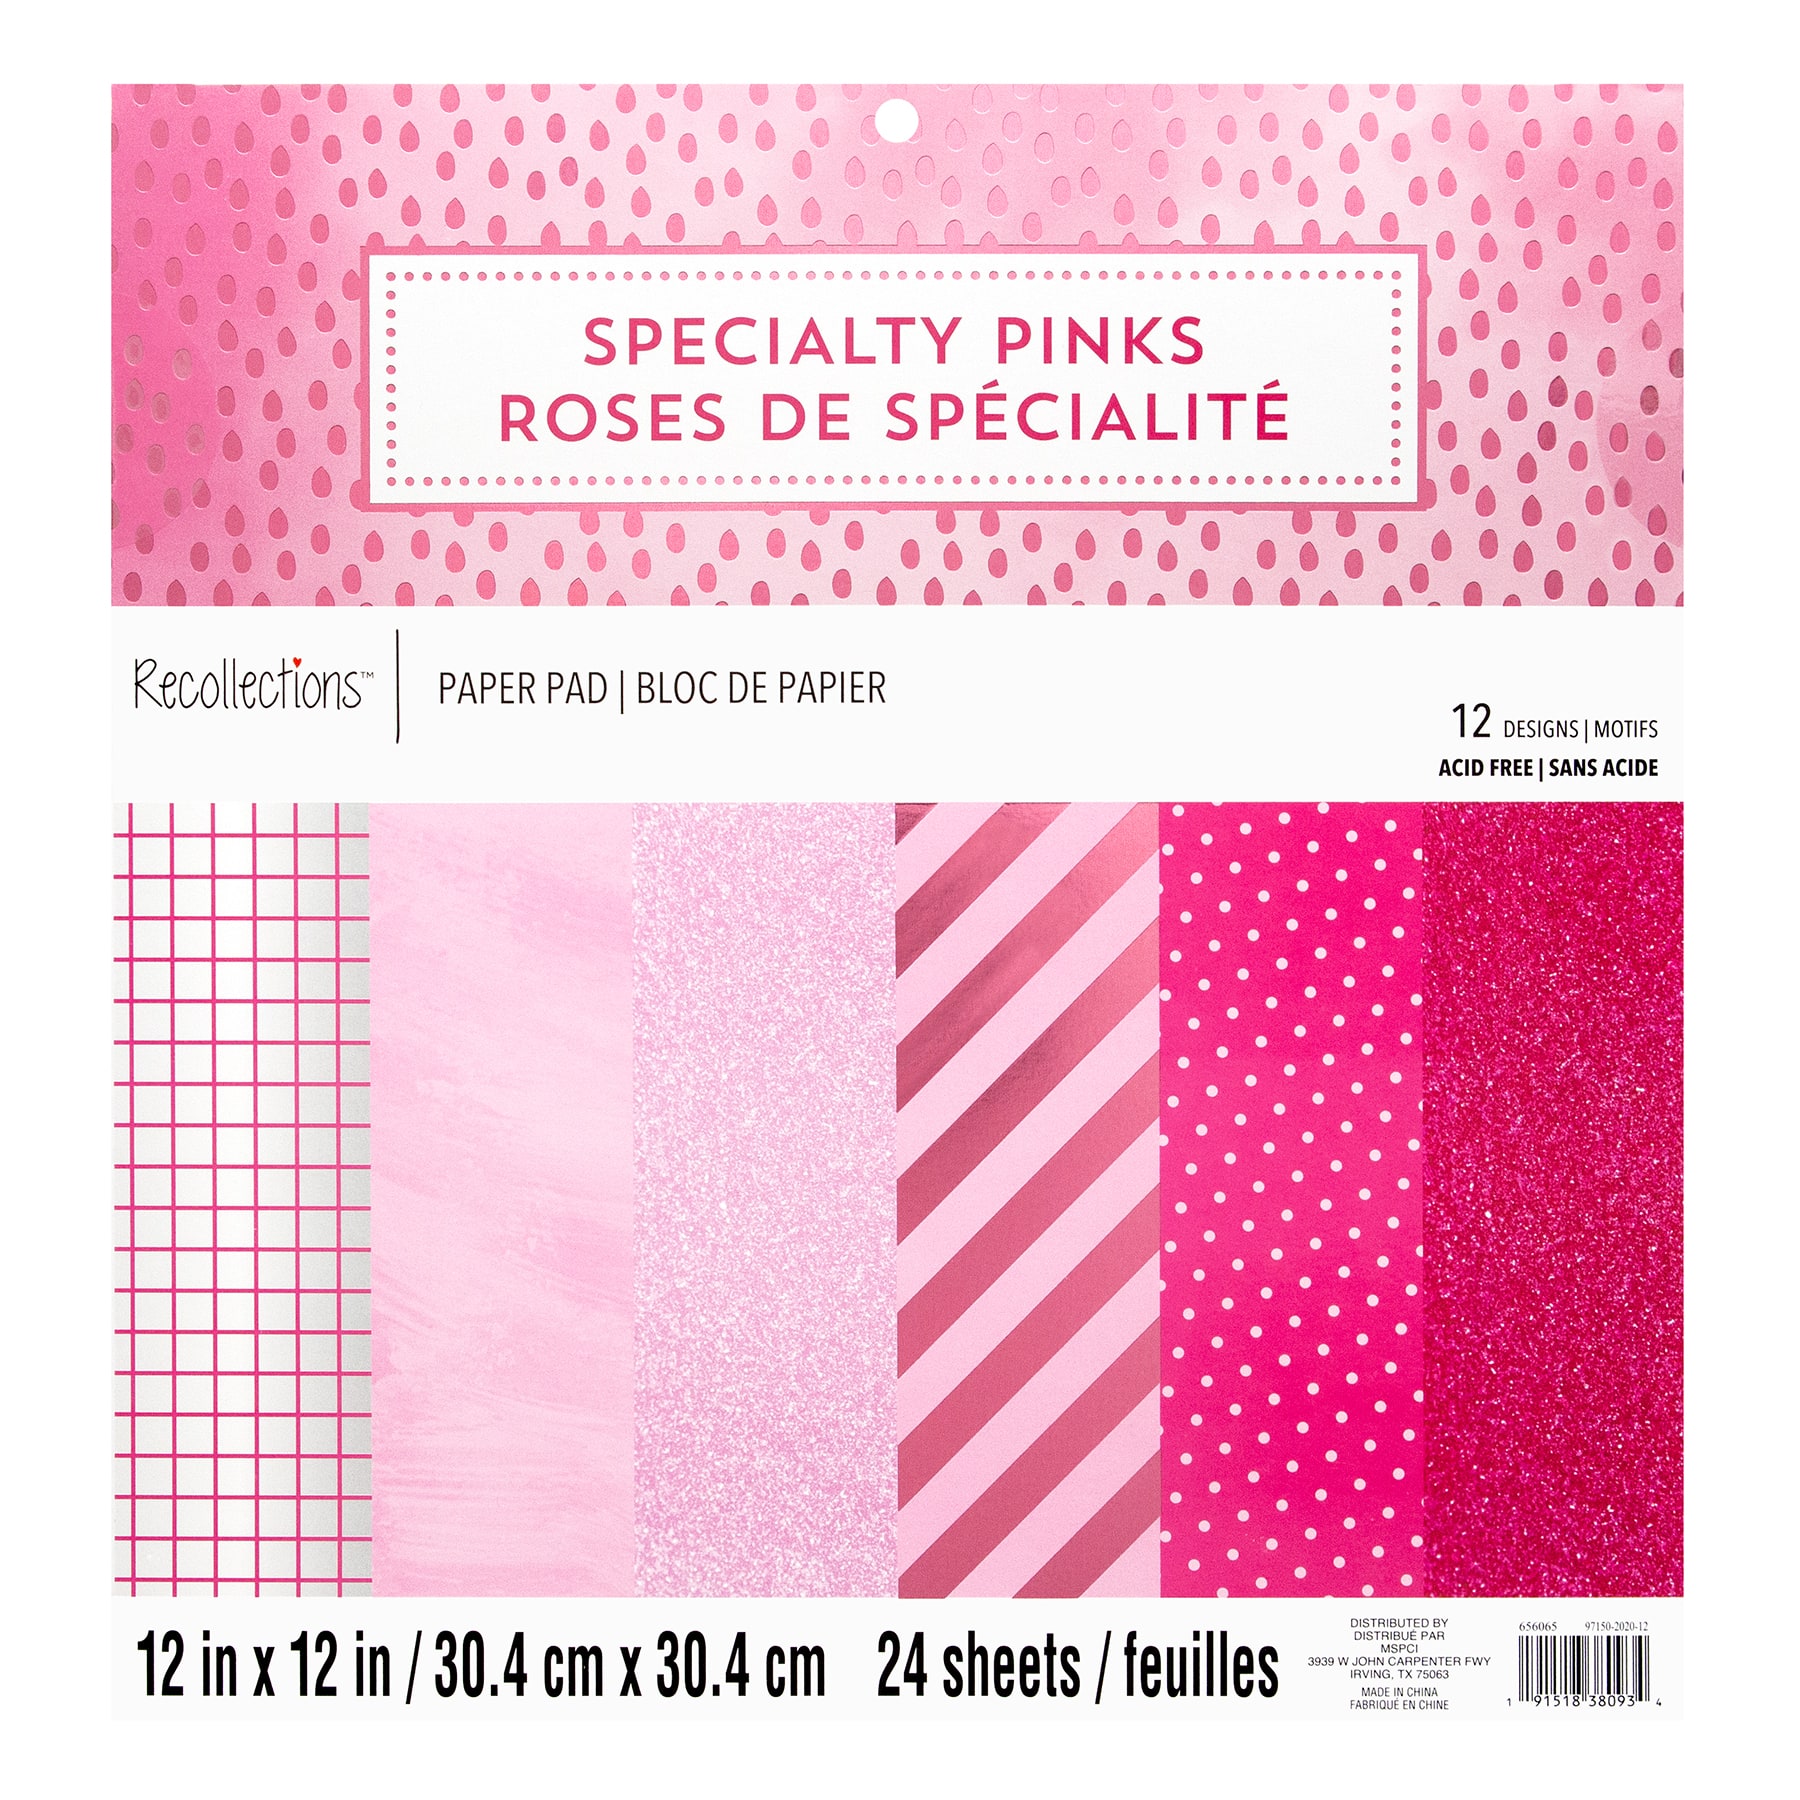 Michaels Bulk 24 Pack: Easter Religious Double-Sided Cardstock Paper by Recollections, 12 inch x 12 inch, Size: 12 x 12